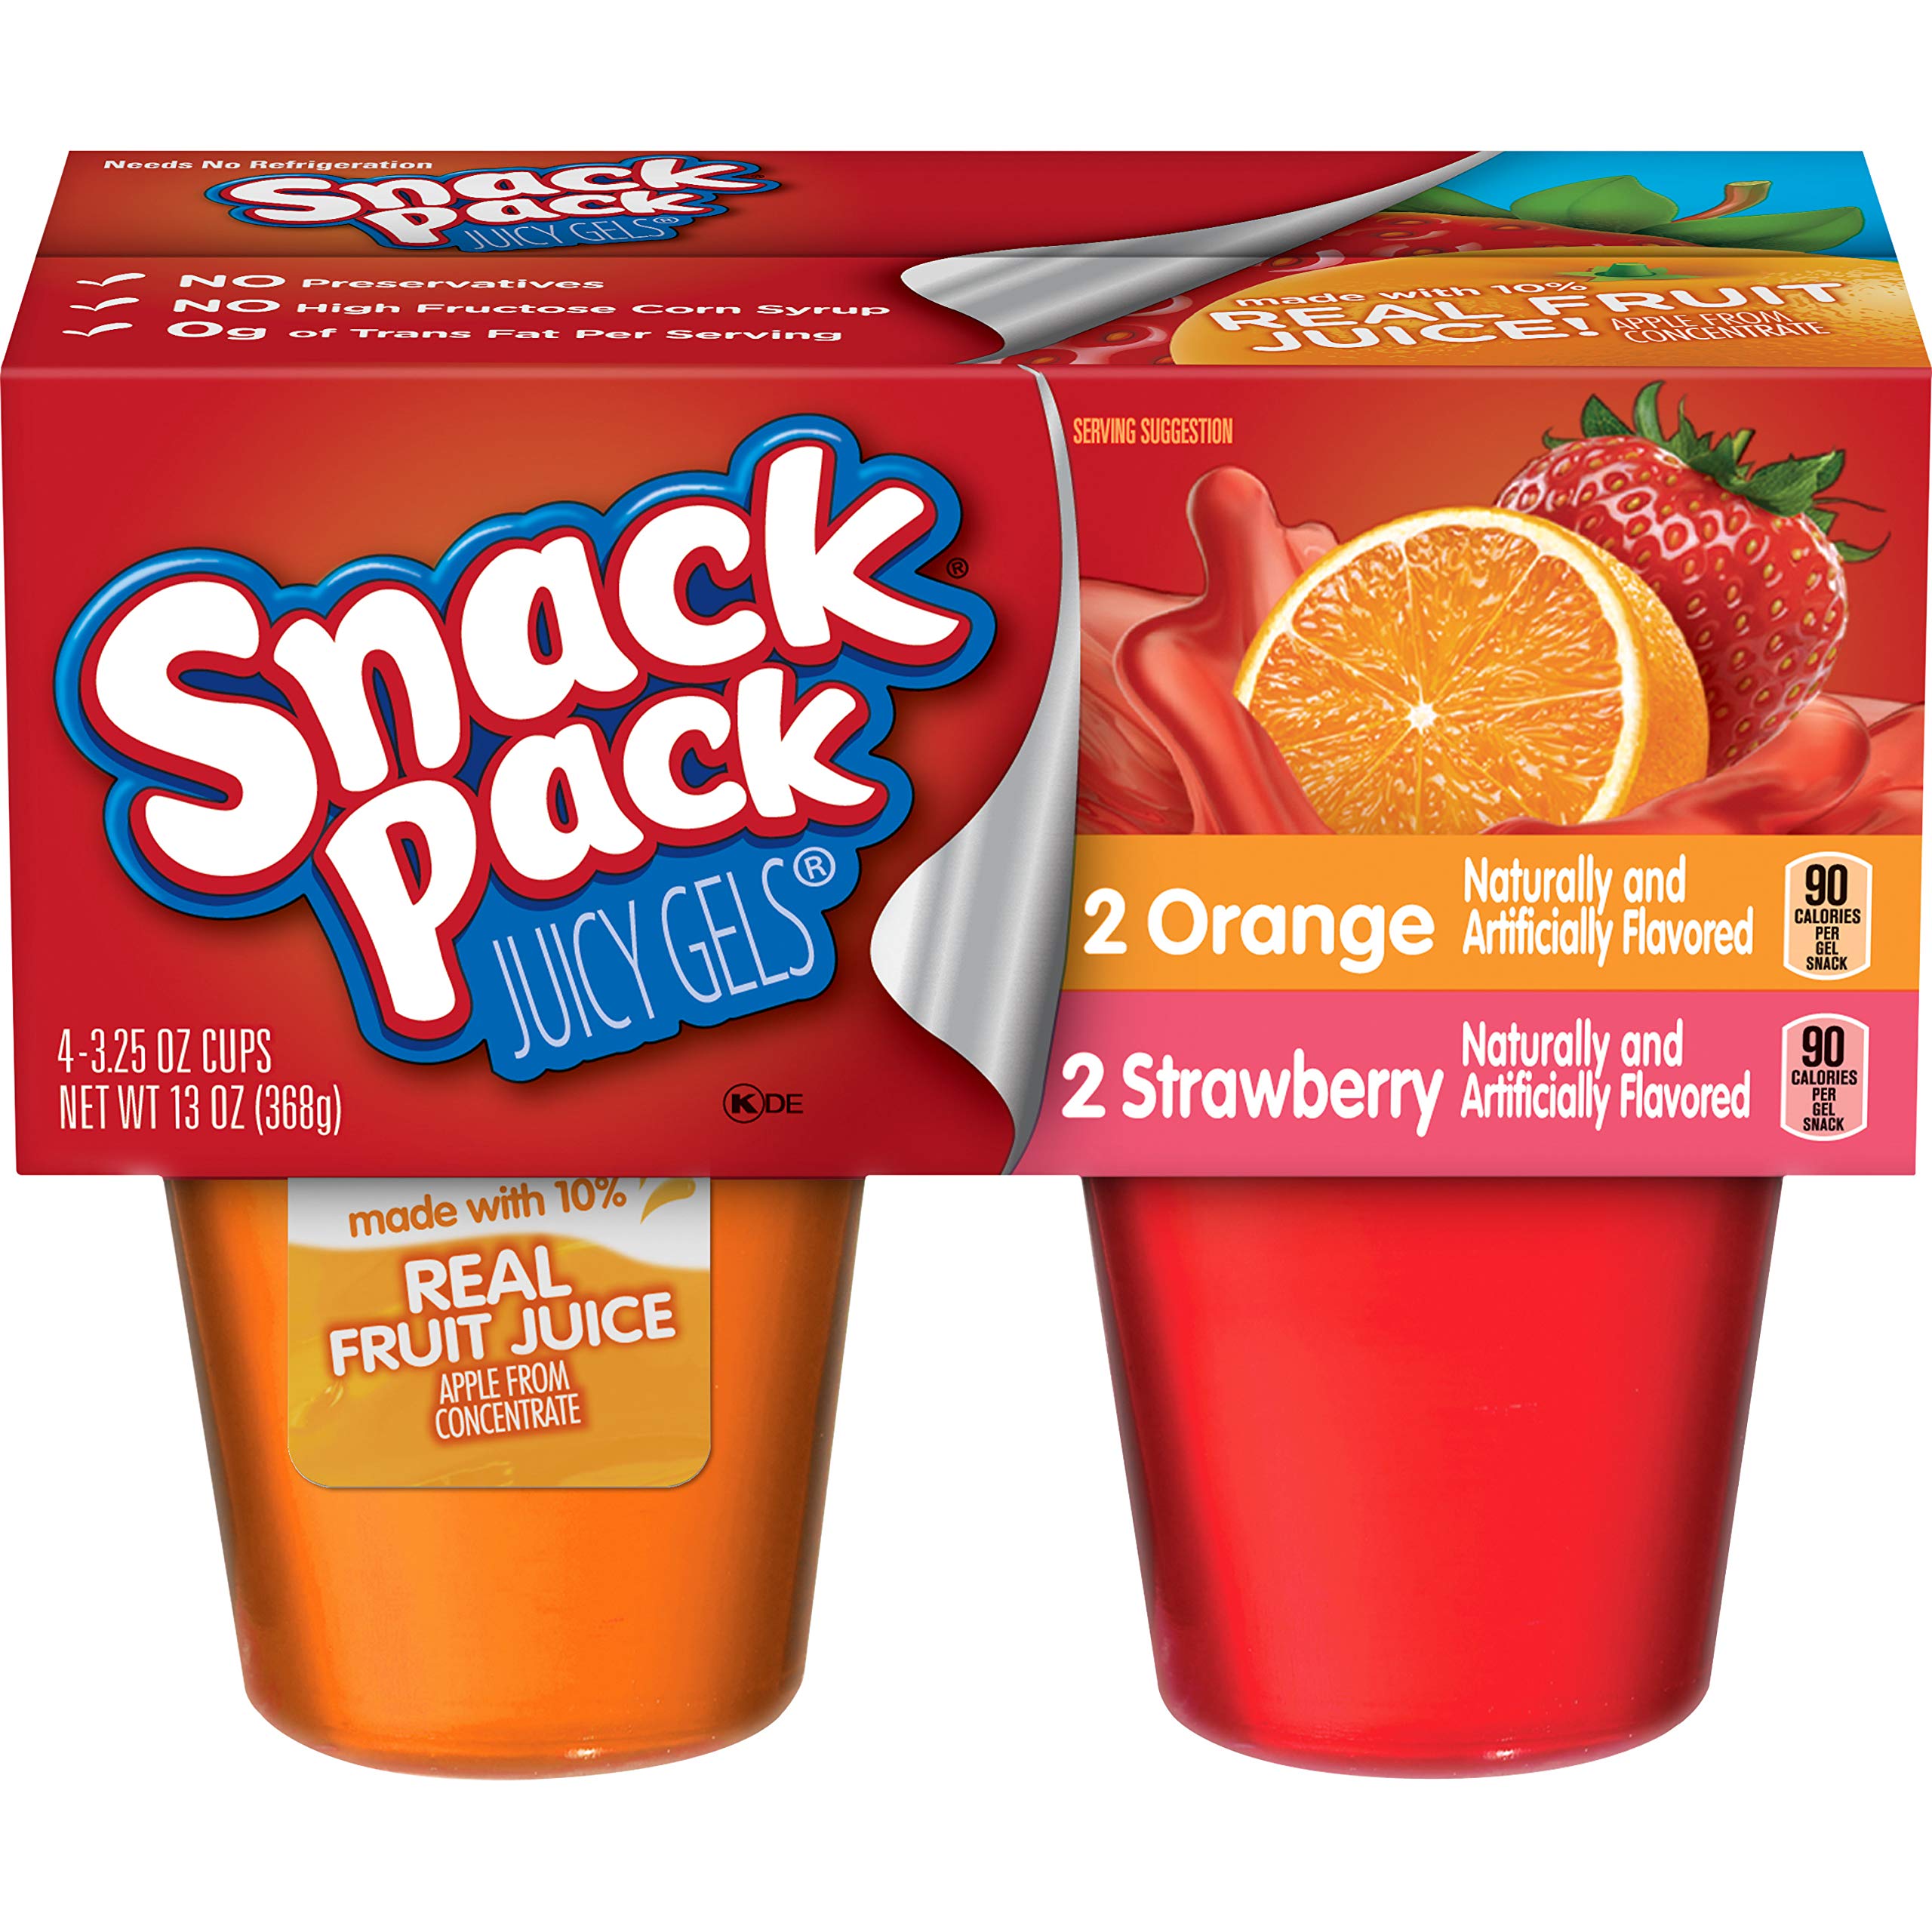 4-Cup 3.25-Ounce Snack Pack Juicy Gels (Strawberry & Orange) $1.20 w S&S + Free Shipping w/ Prime or on orders $25+